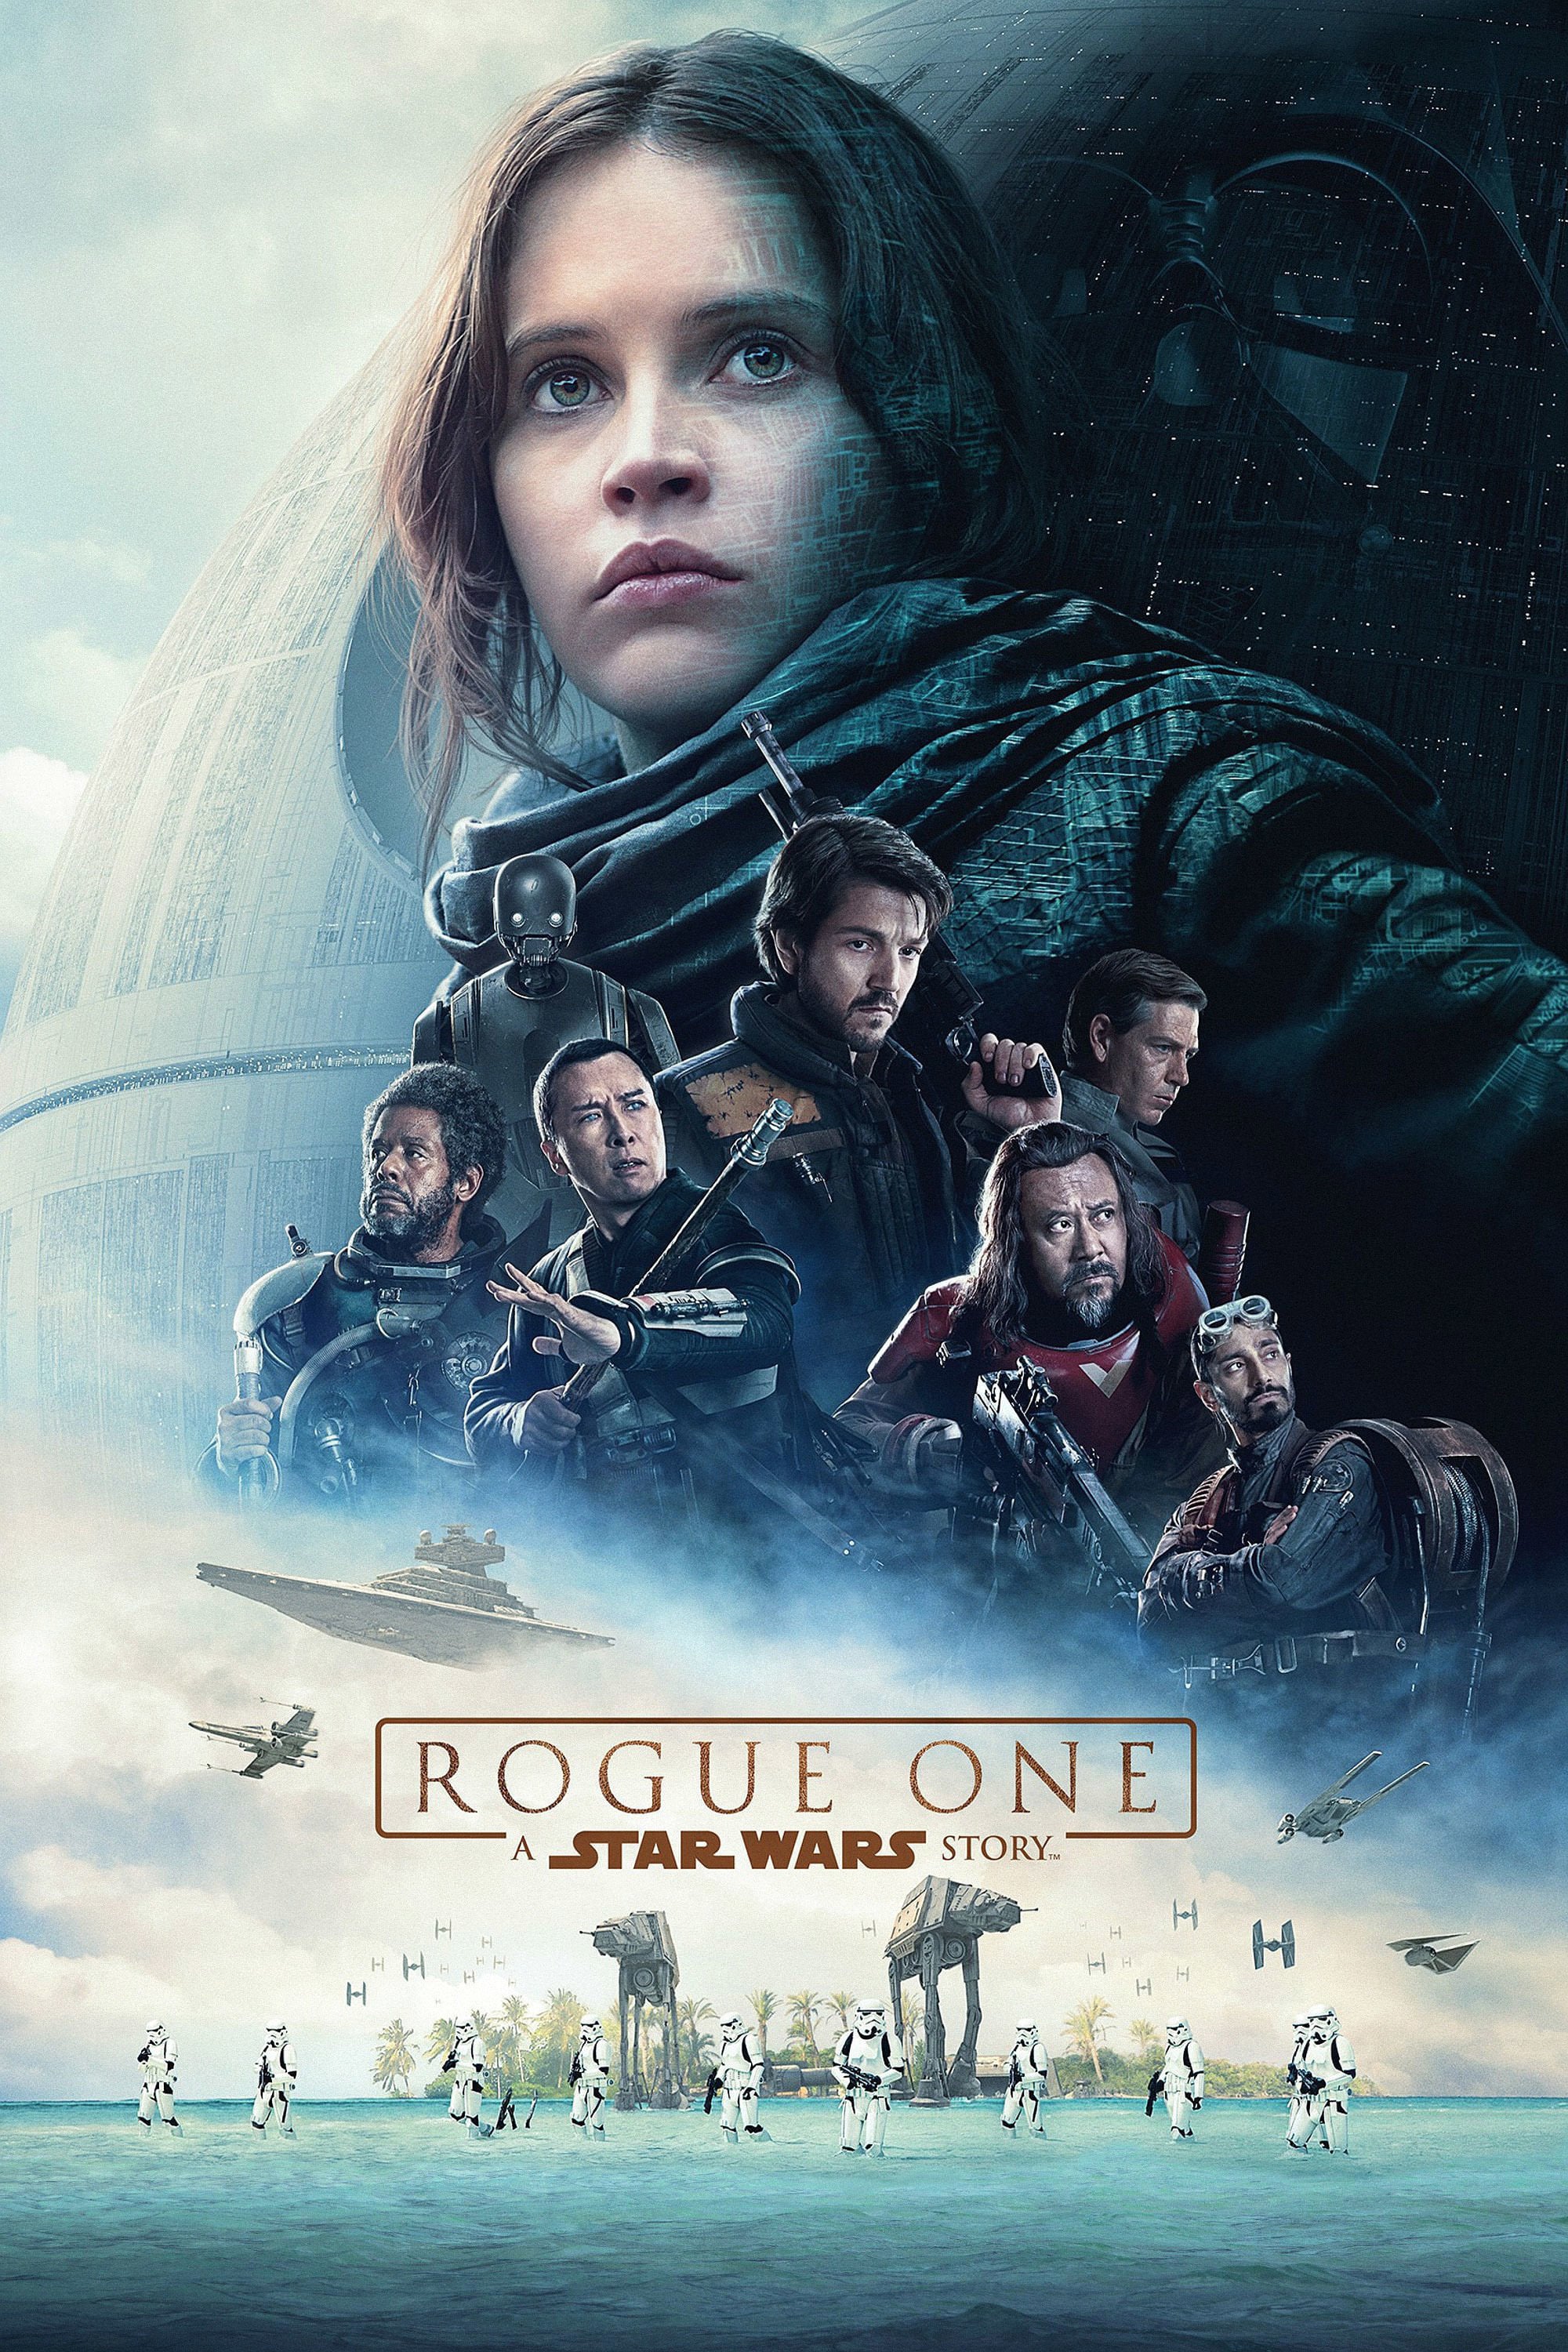 Poster for the movie "Rogue One - A Star Wars Story"